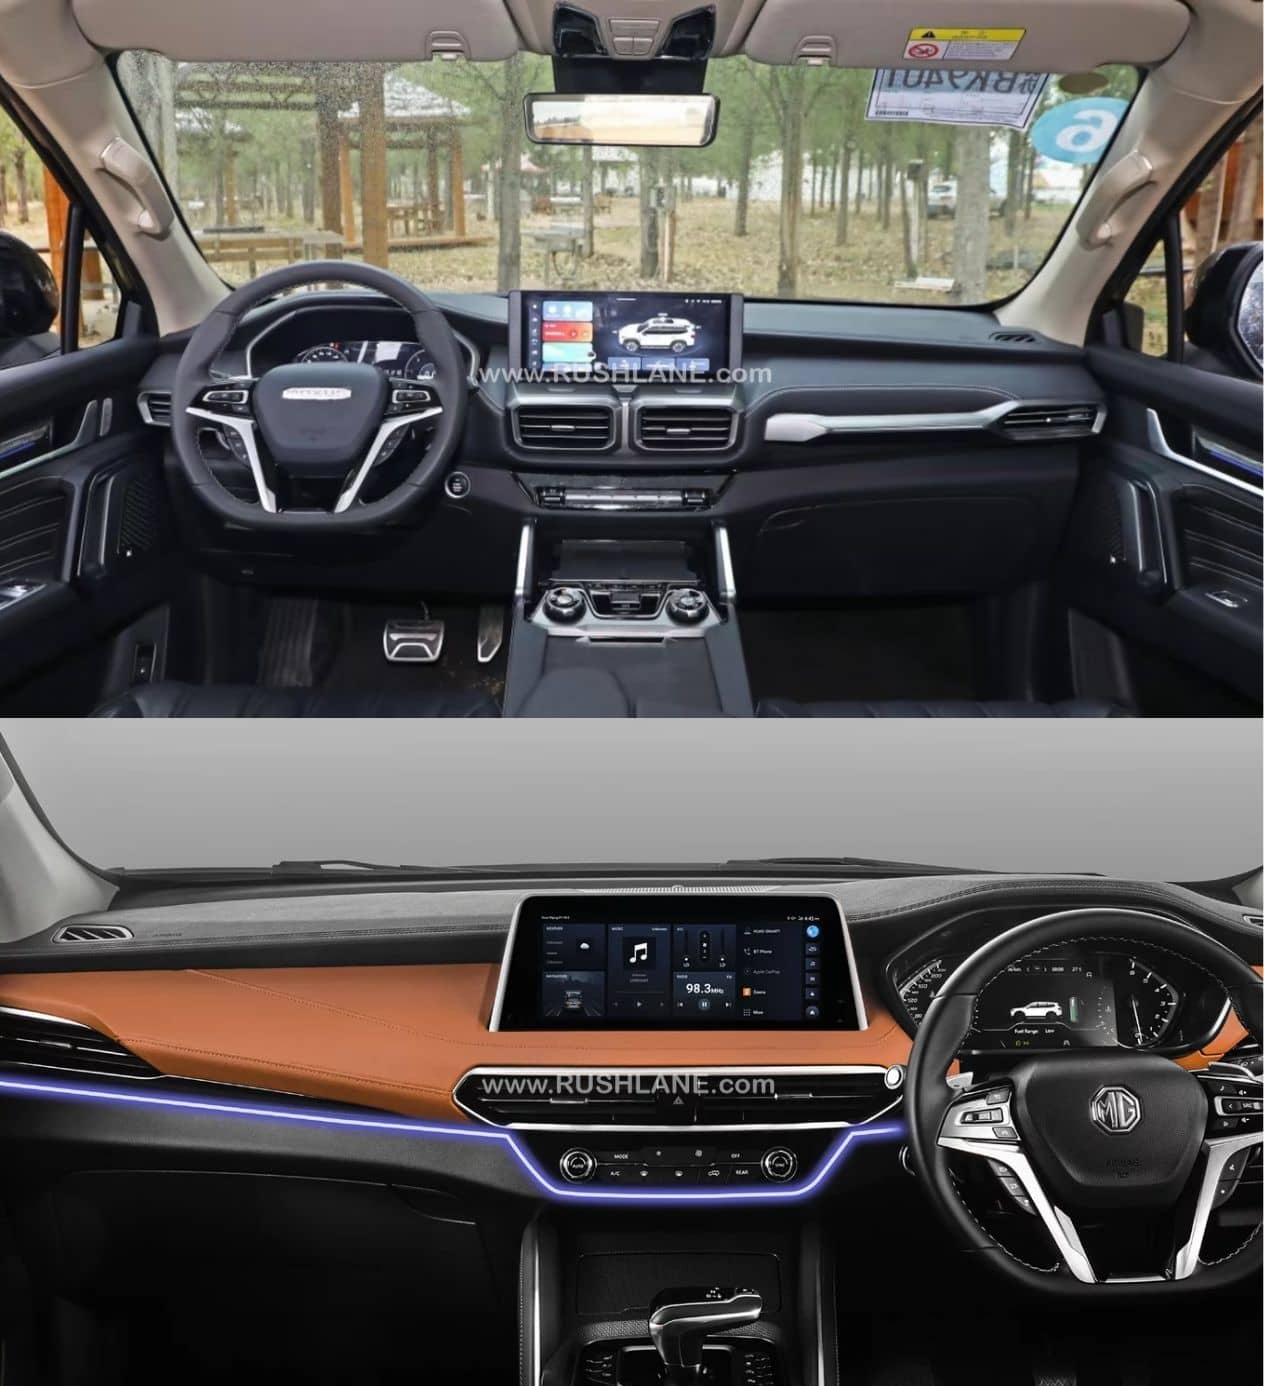 Maxus Territory Vs Current MG Gloster - Interior